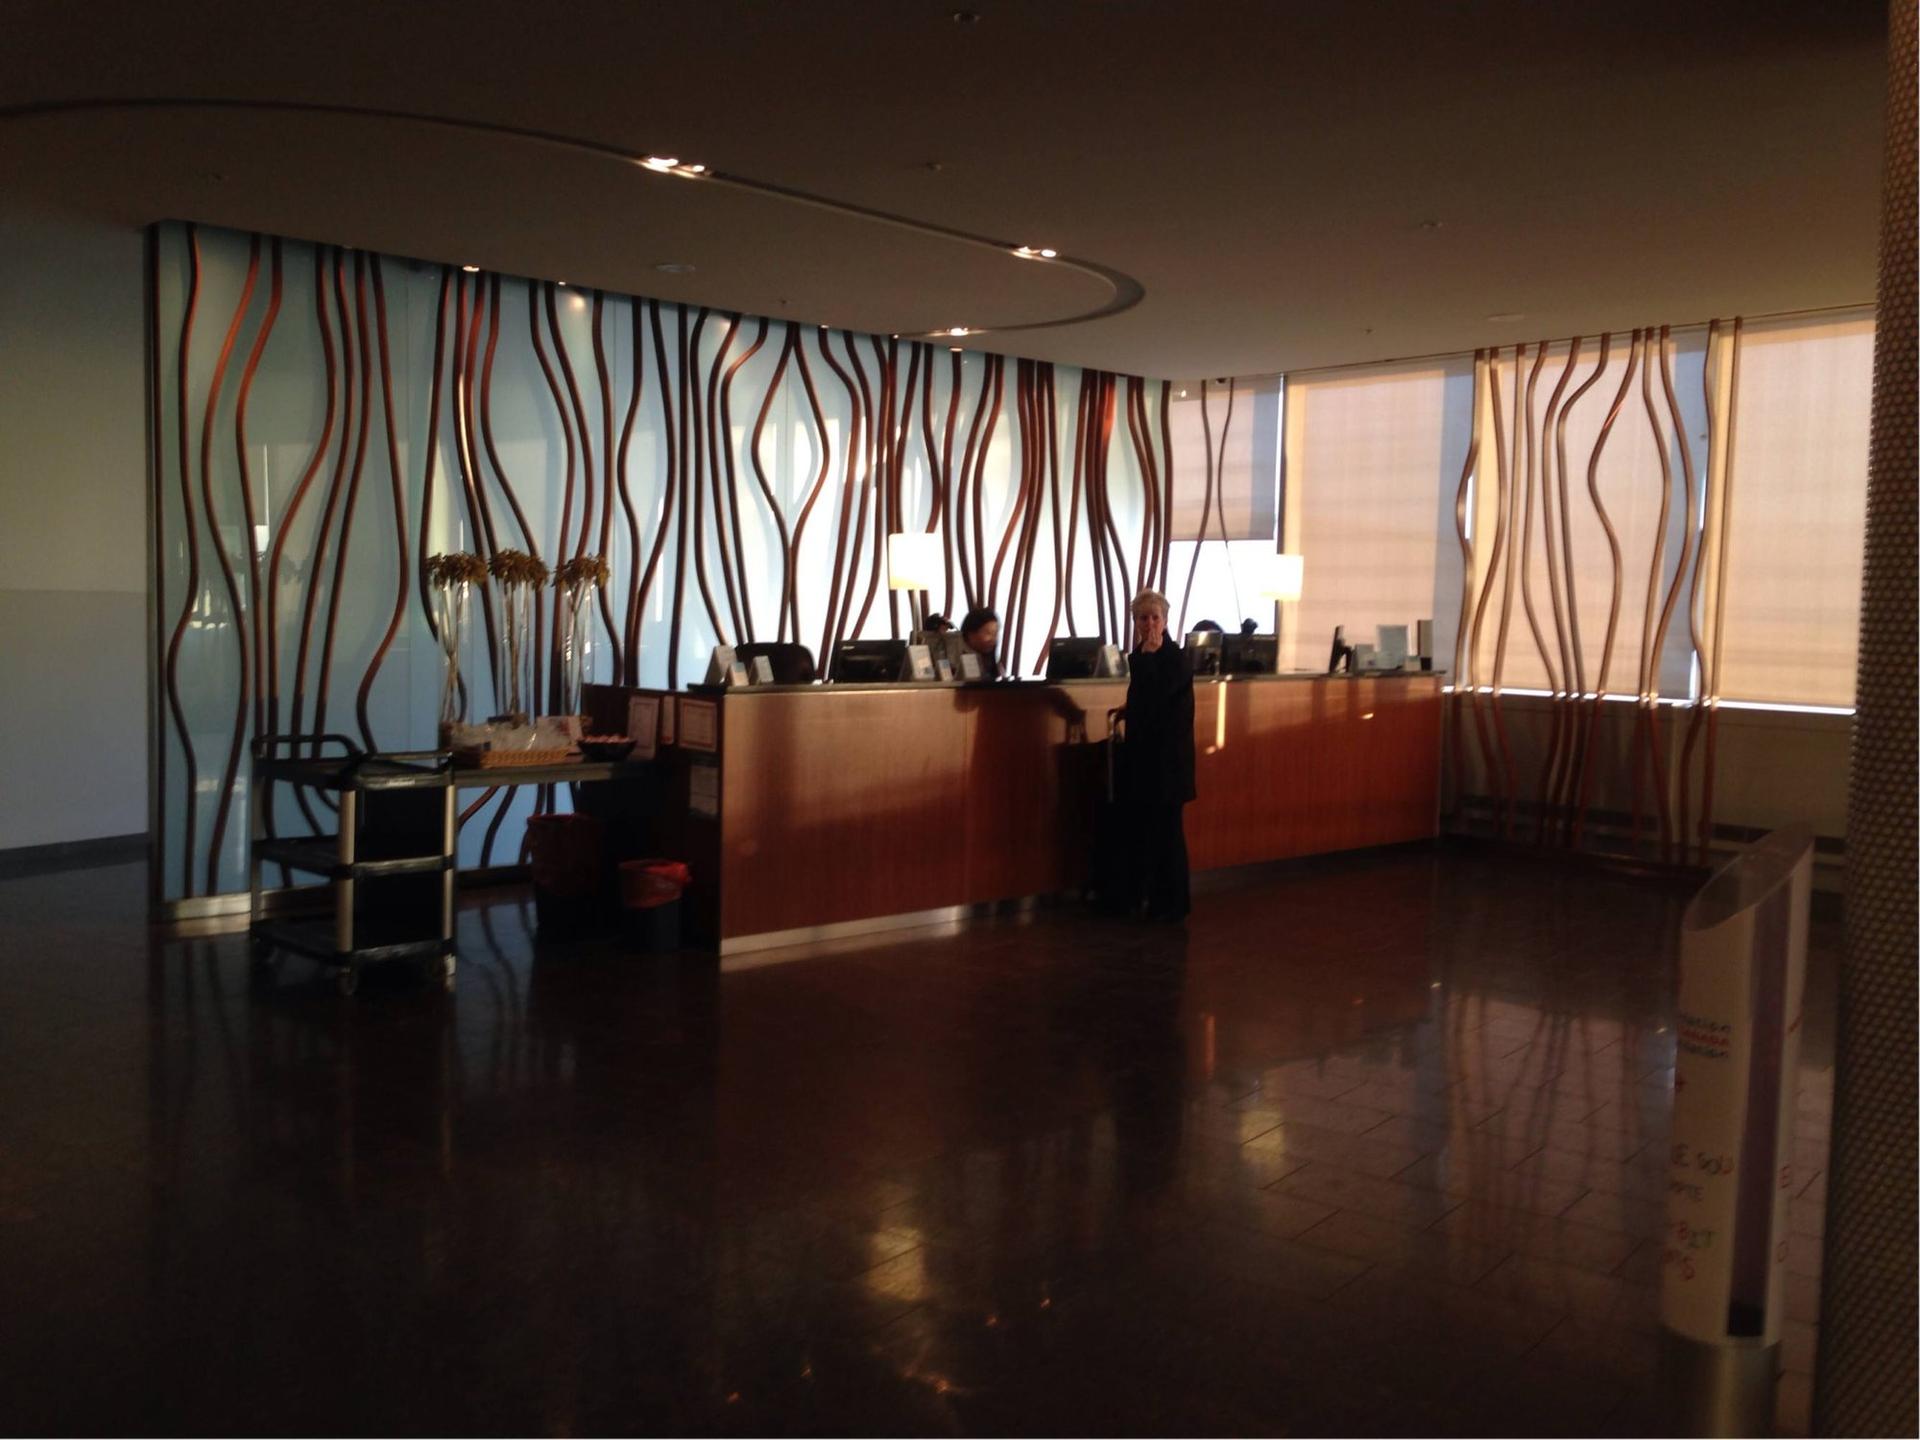 Air Canada Maple Leaf Lounge image 22 of 30